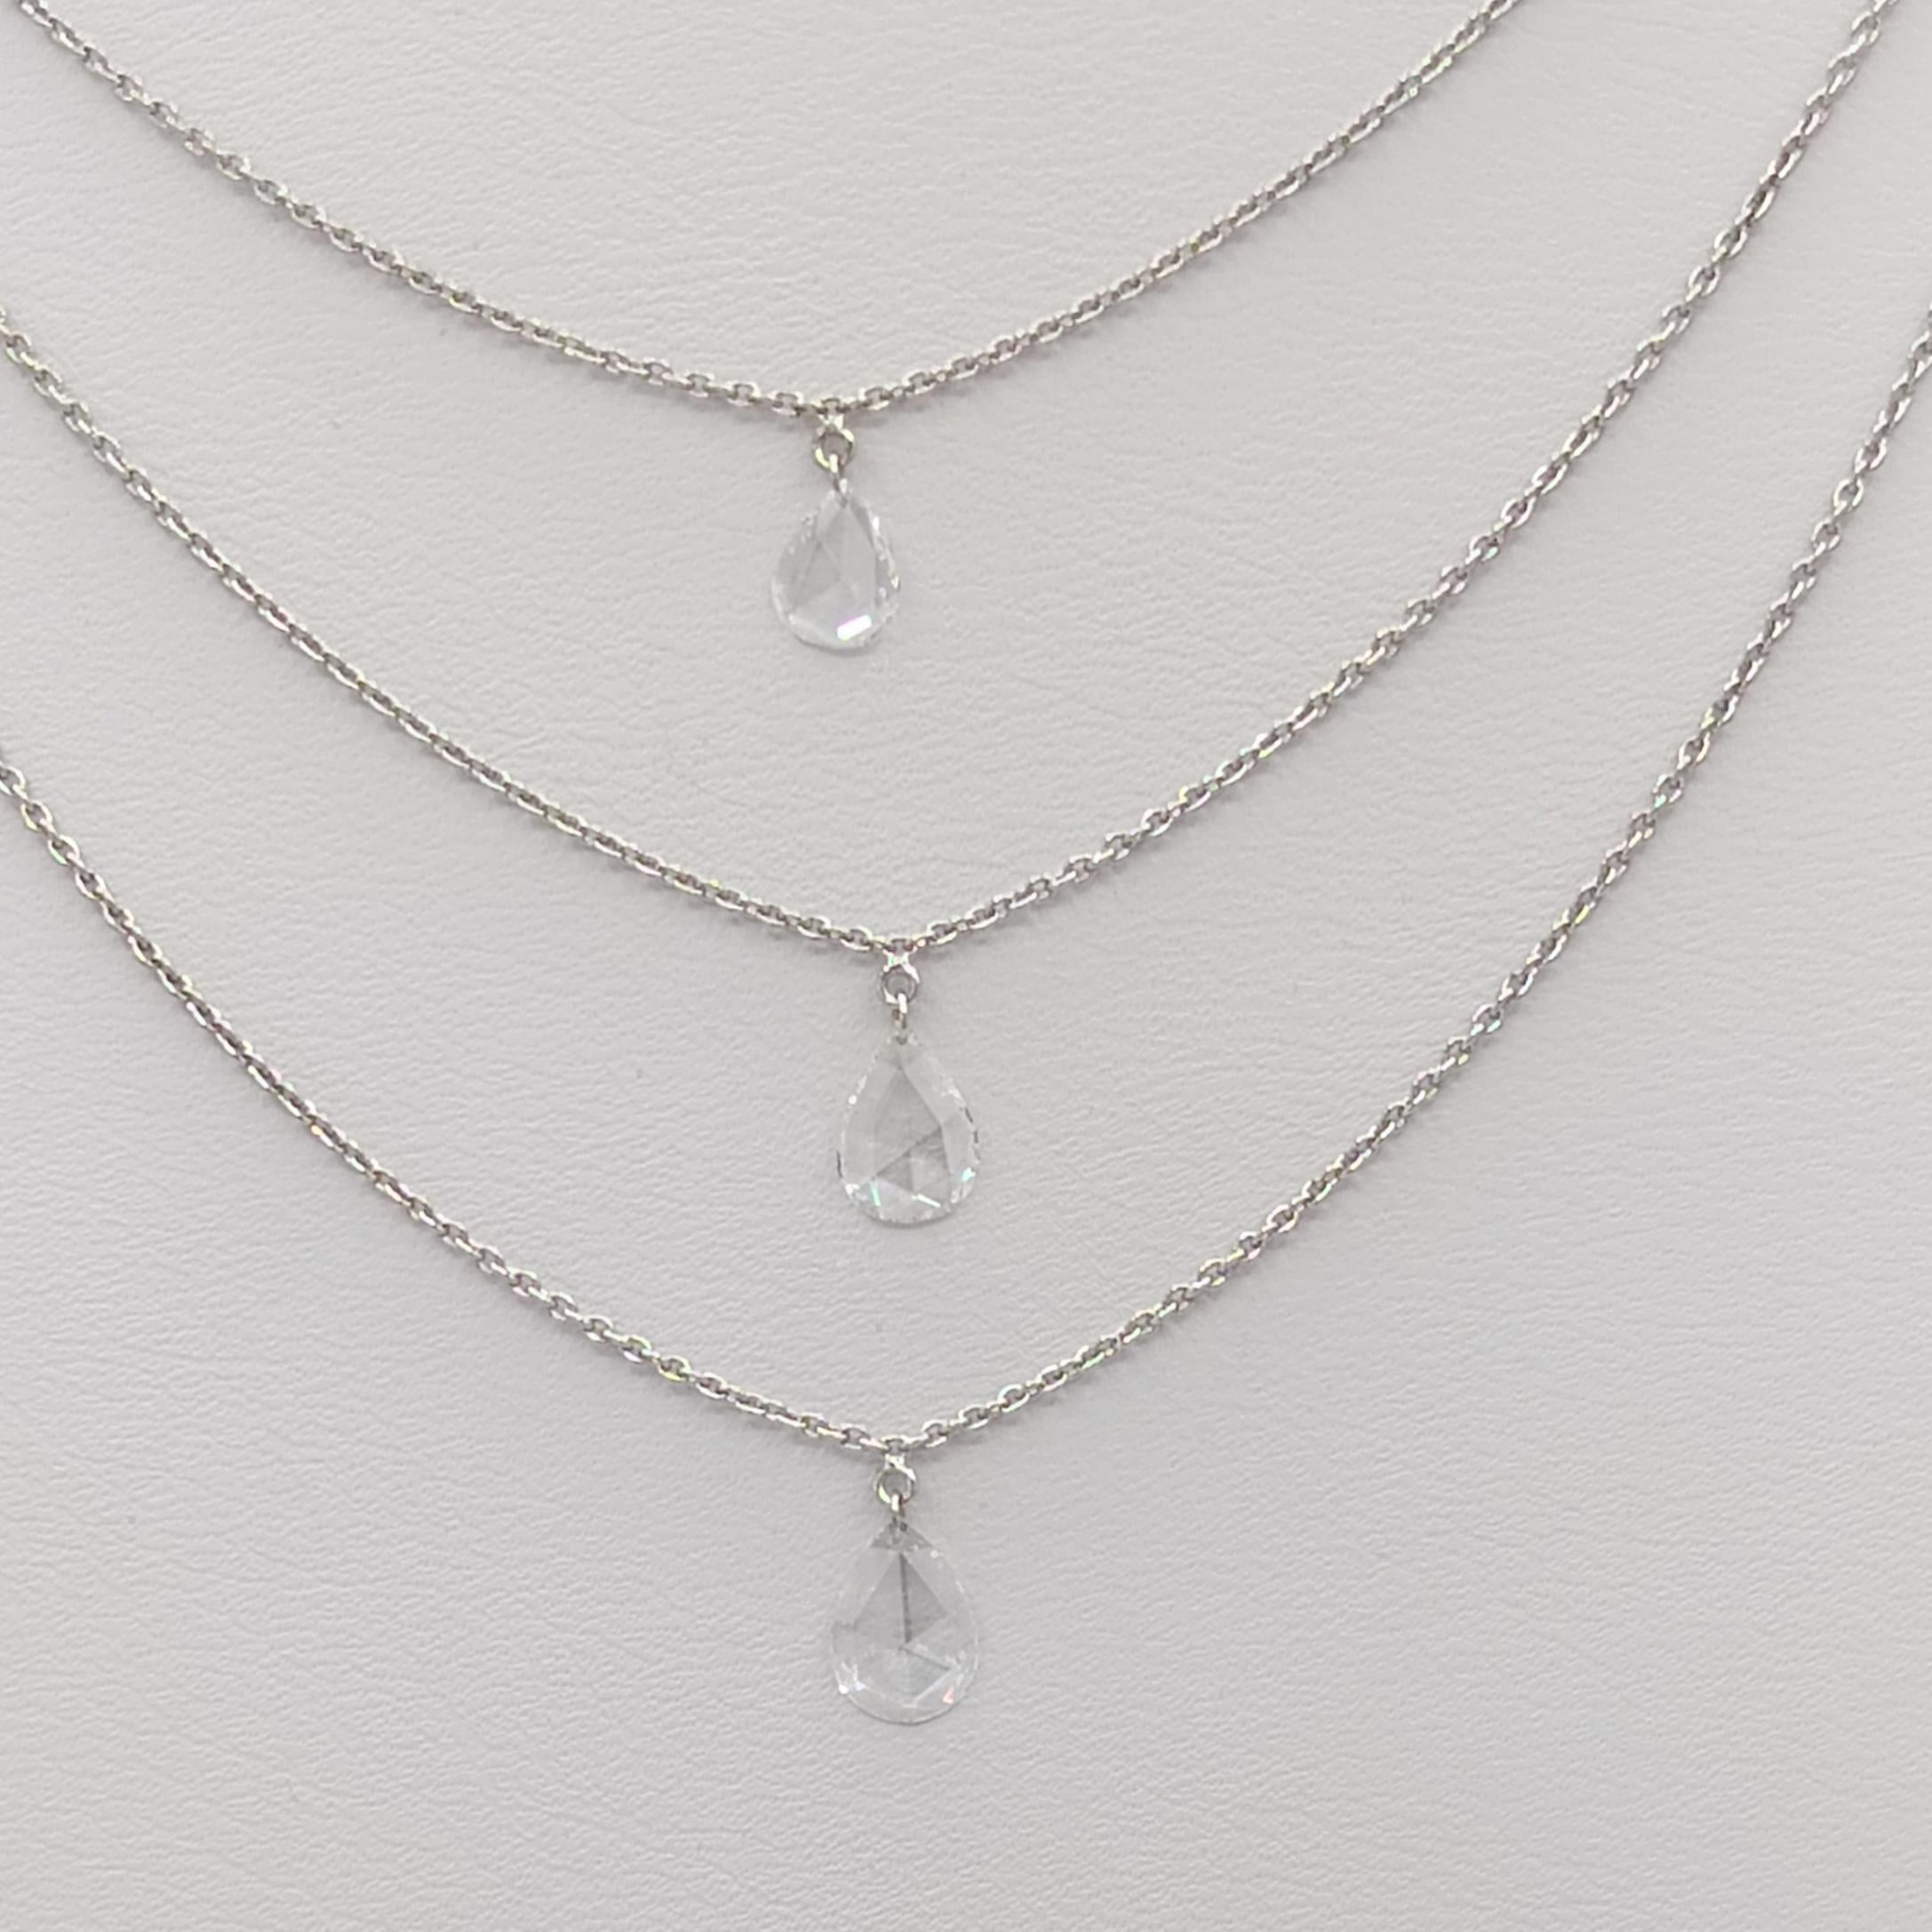 Beautiful diamond necklace with 0.58 ct. good quality, white, and bright diamond rosecuts.  Handmade in 18k white gold.  Length is 16